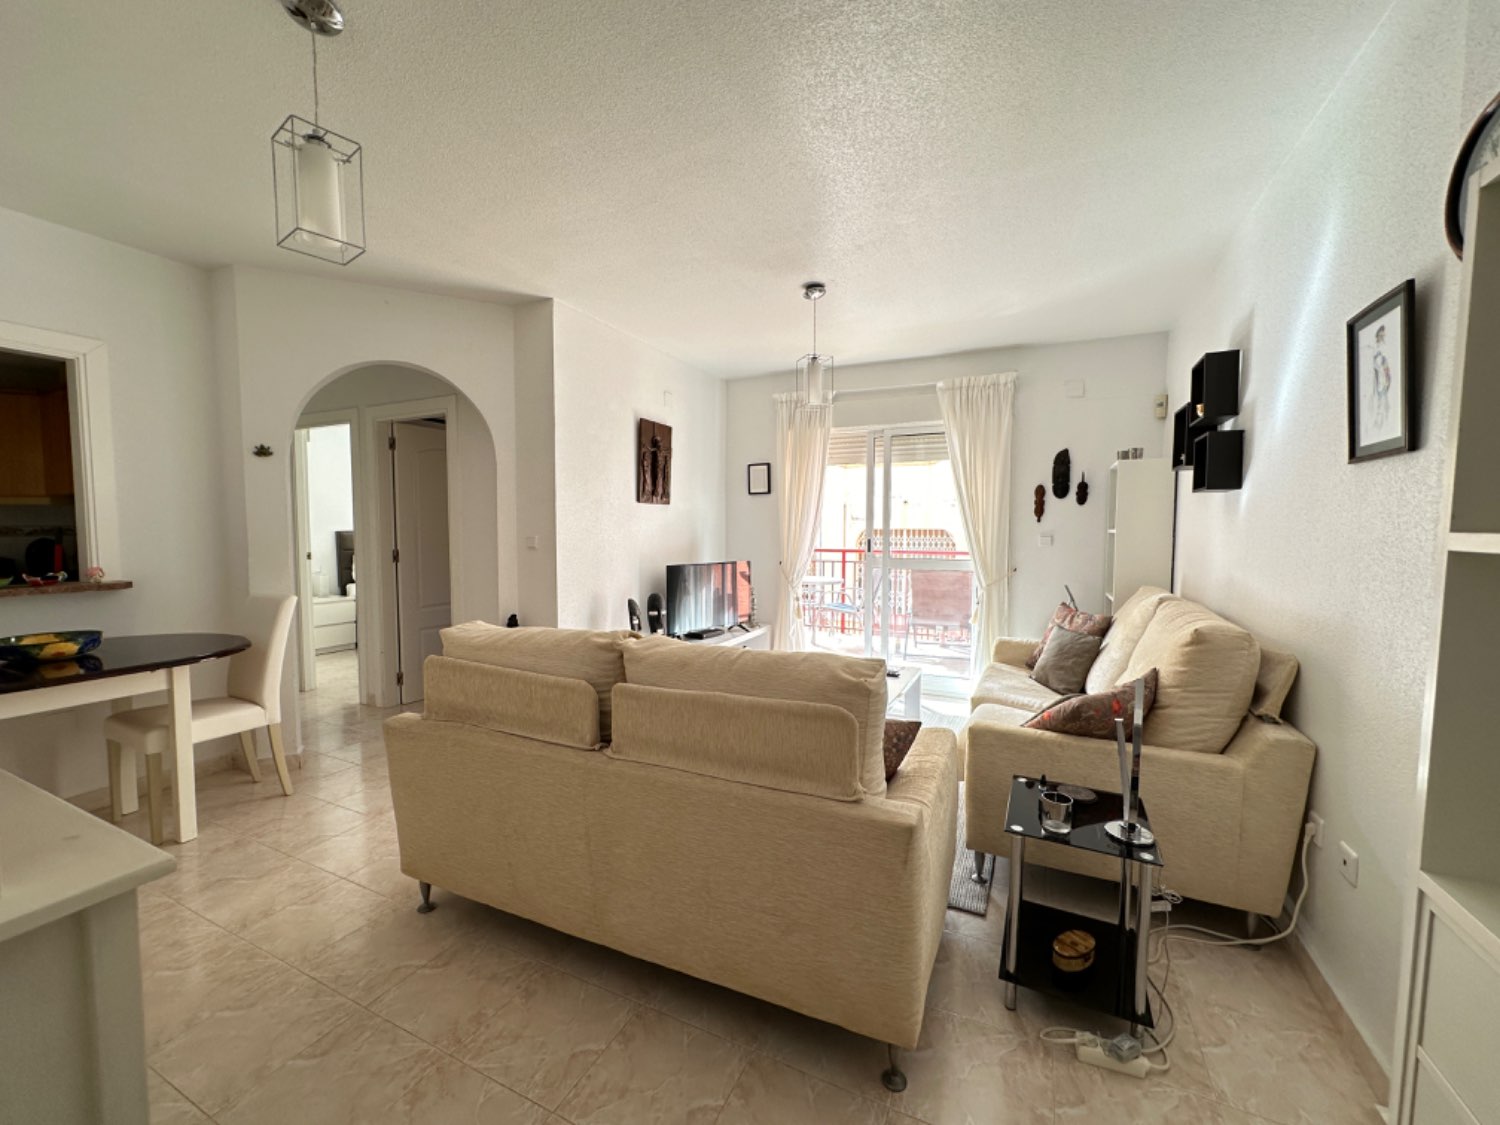 GROUND FLOOR OPPORTUNITY LOCATED IN FLORIDA WITH 2 BEDROOMS 1 BATHROOM